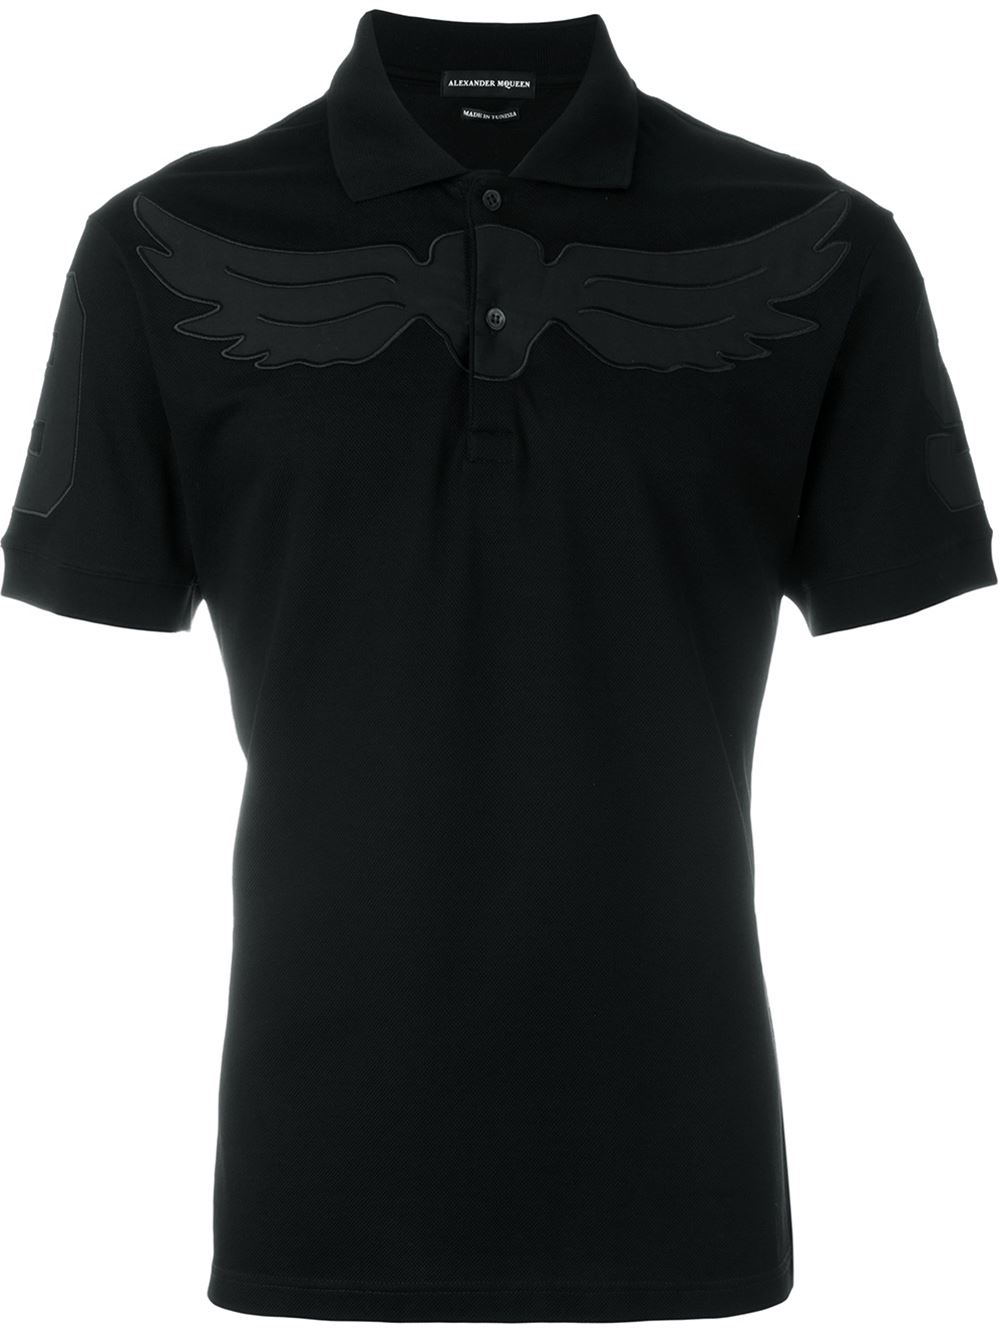 Alexander mcqueen Wings Embroidered Polo Shirt in Black for Men | Lyst